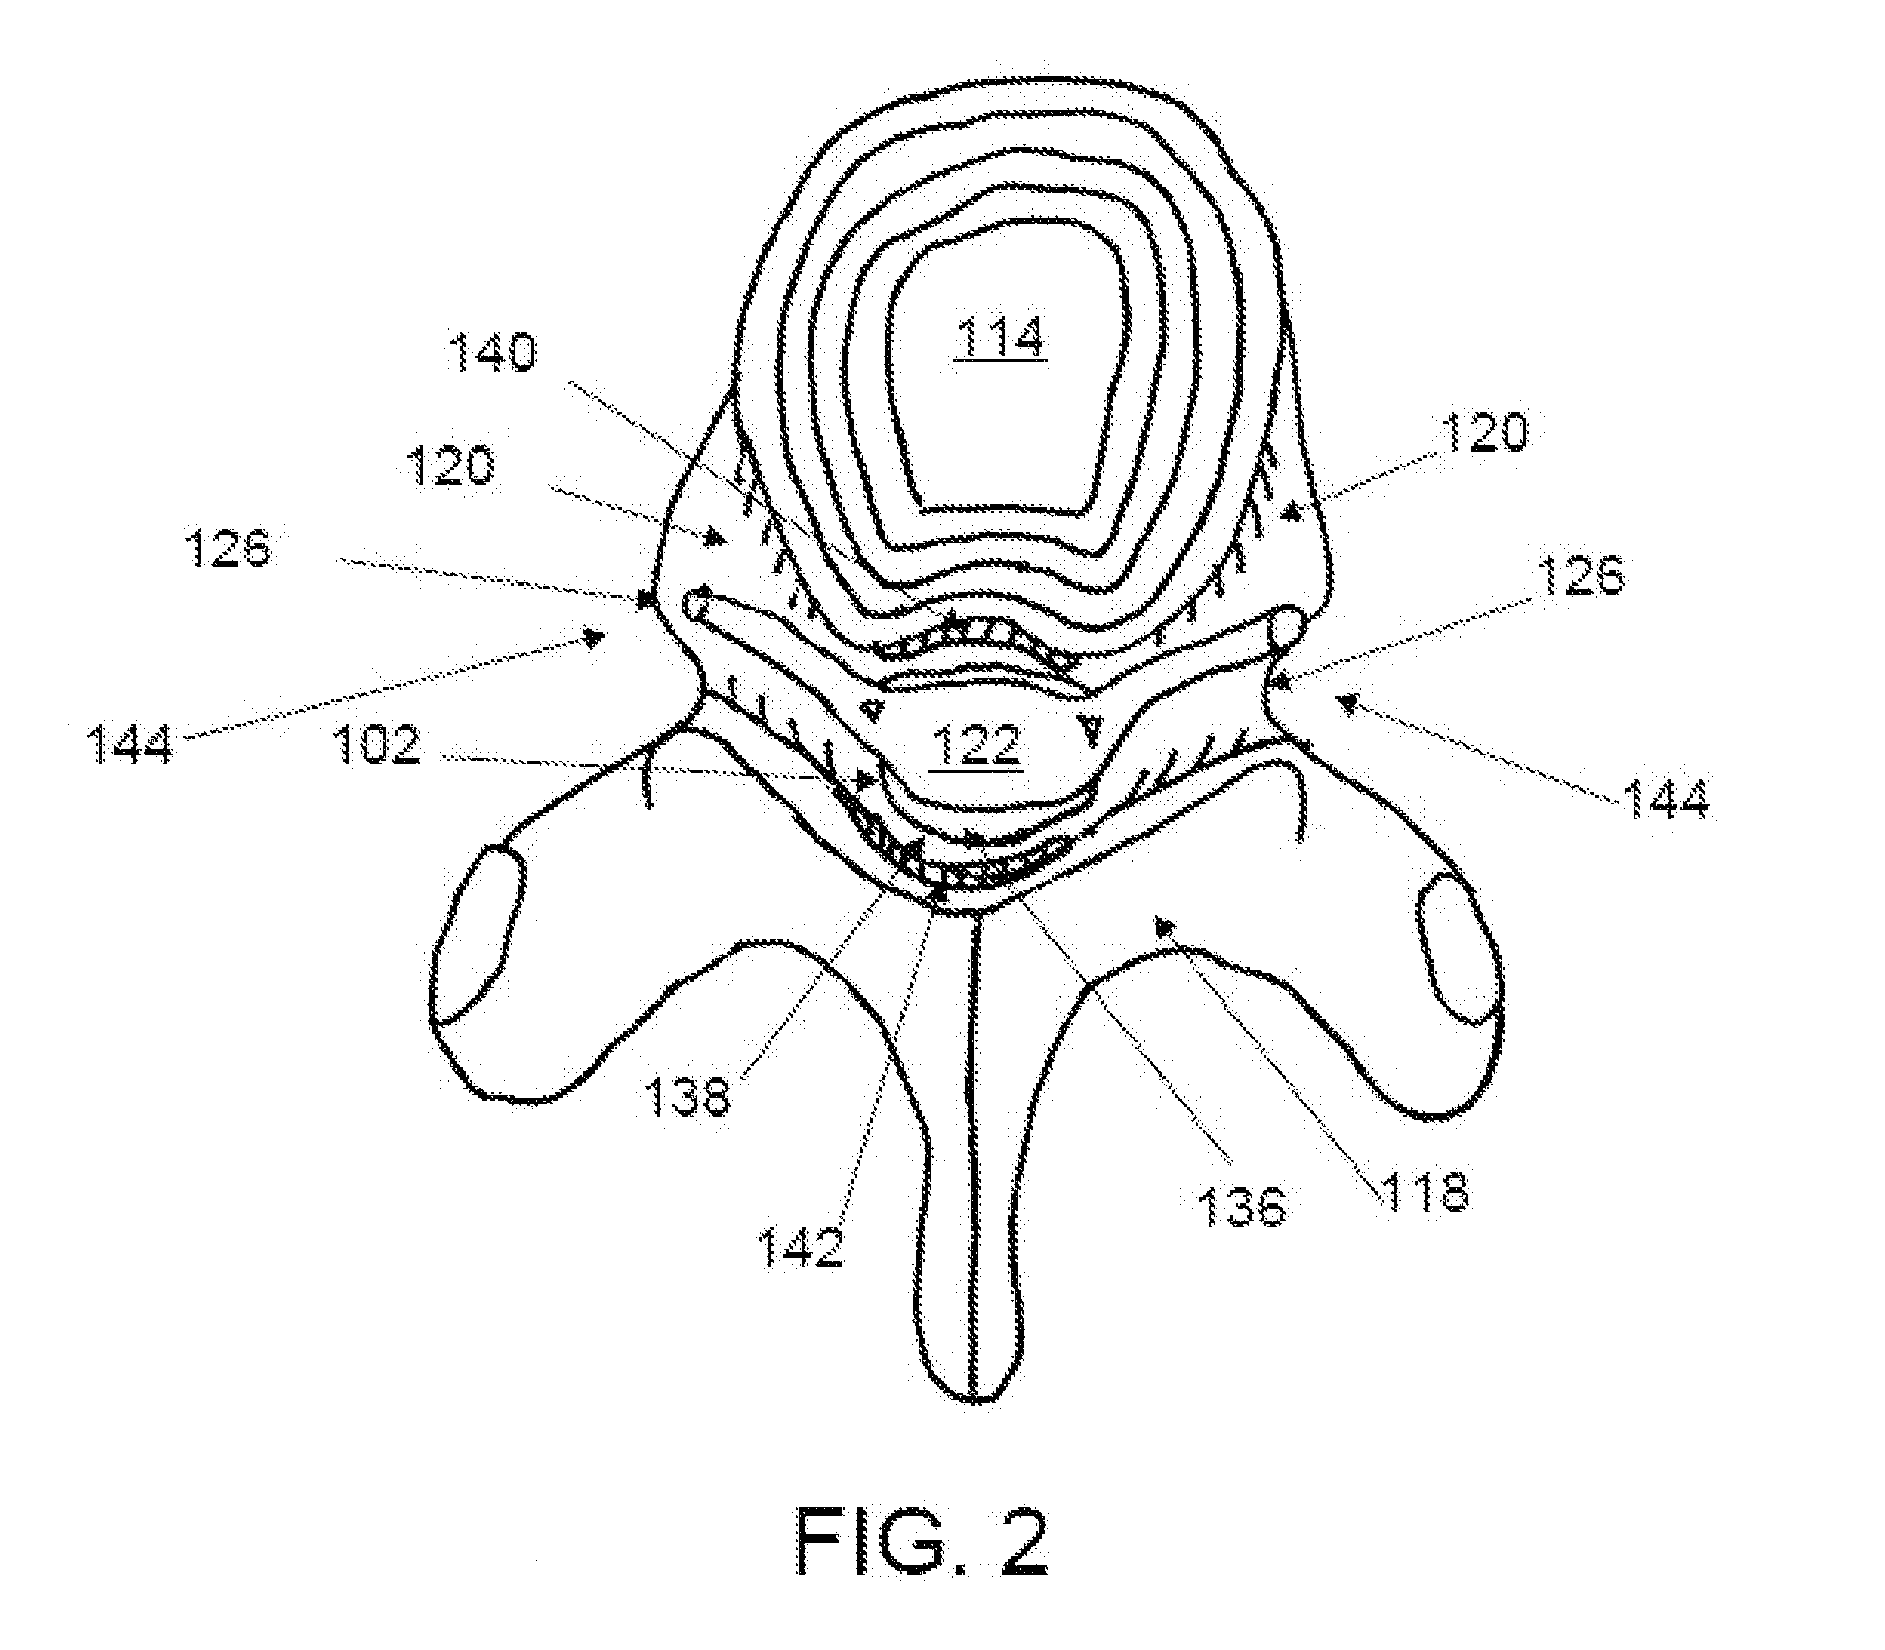 Discectomy devices and related methods